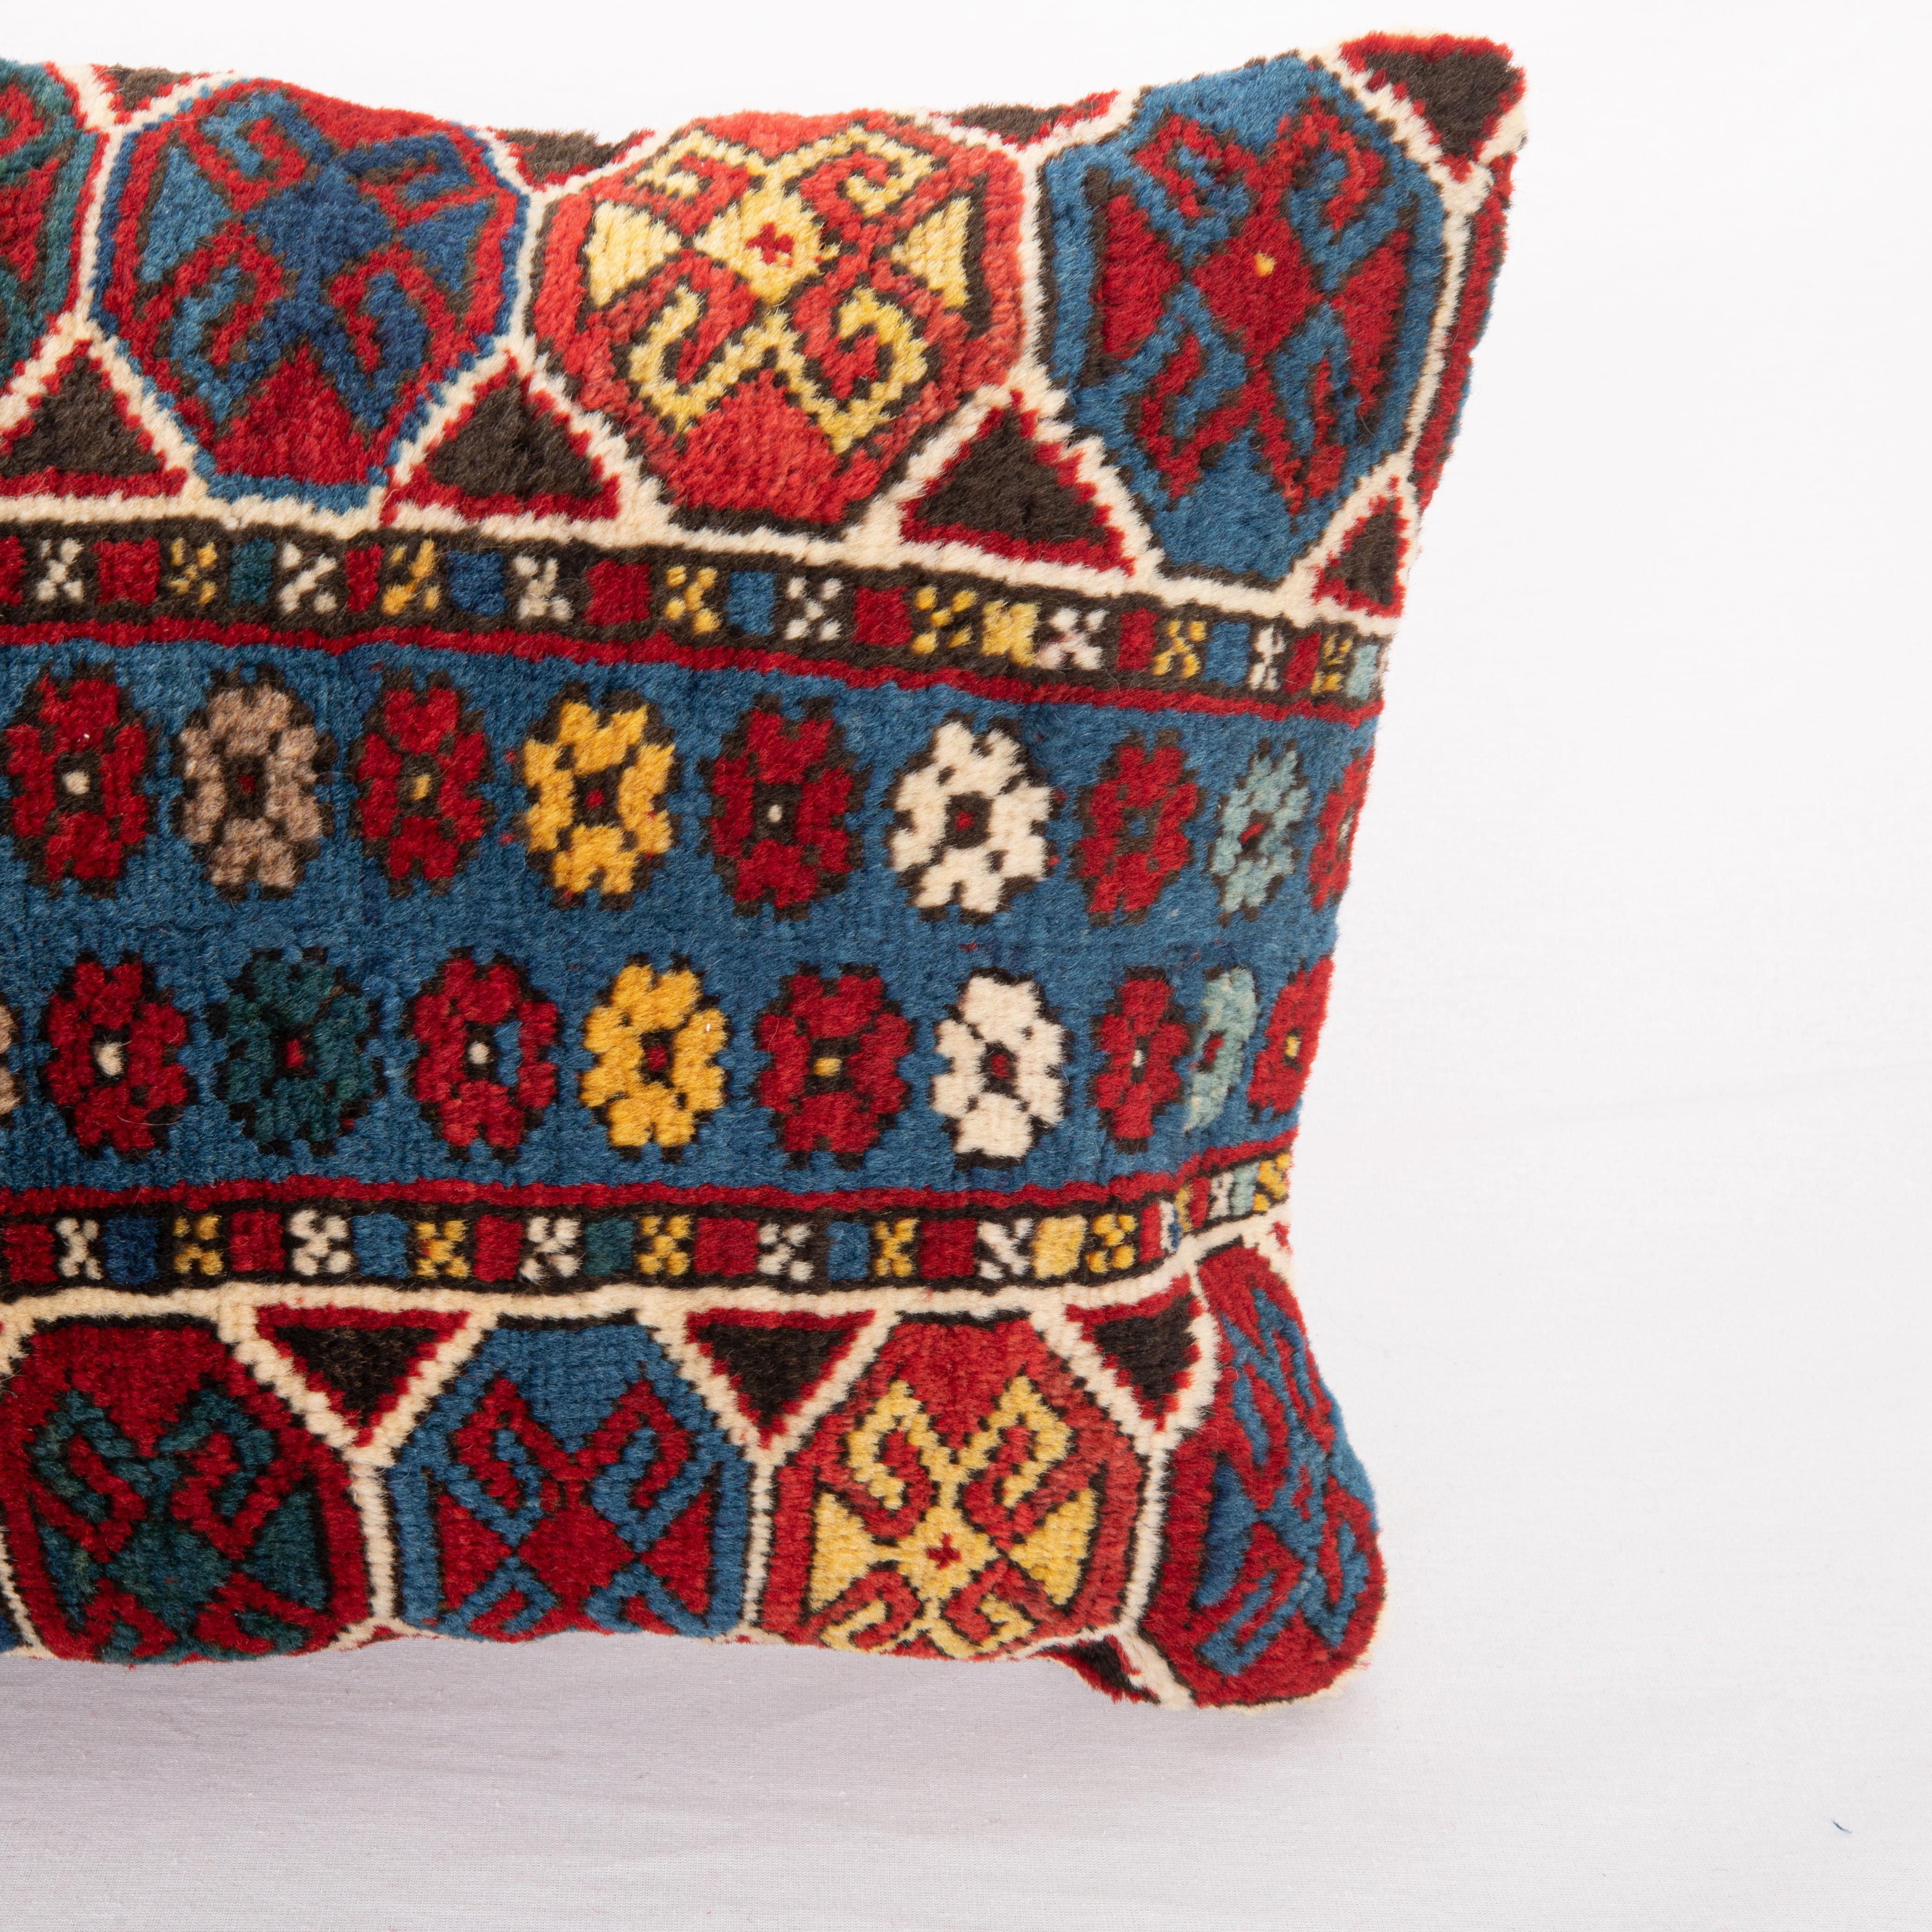 Hand-Woven Pillow Cover. Made from a Caucasian Rug, late 19th C.